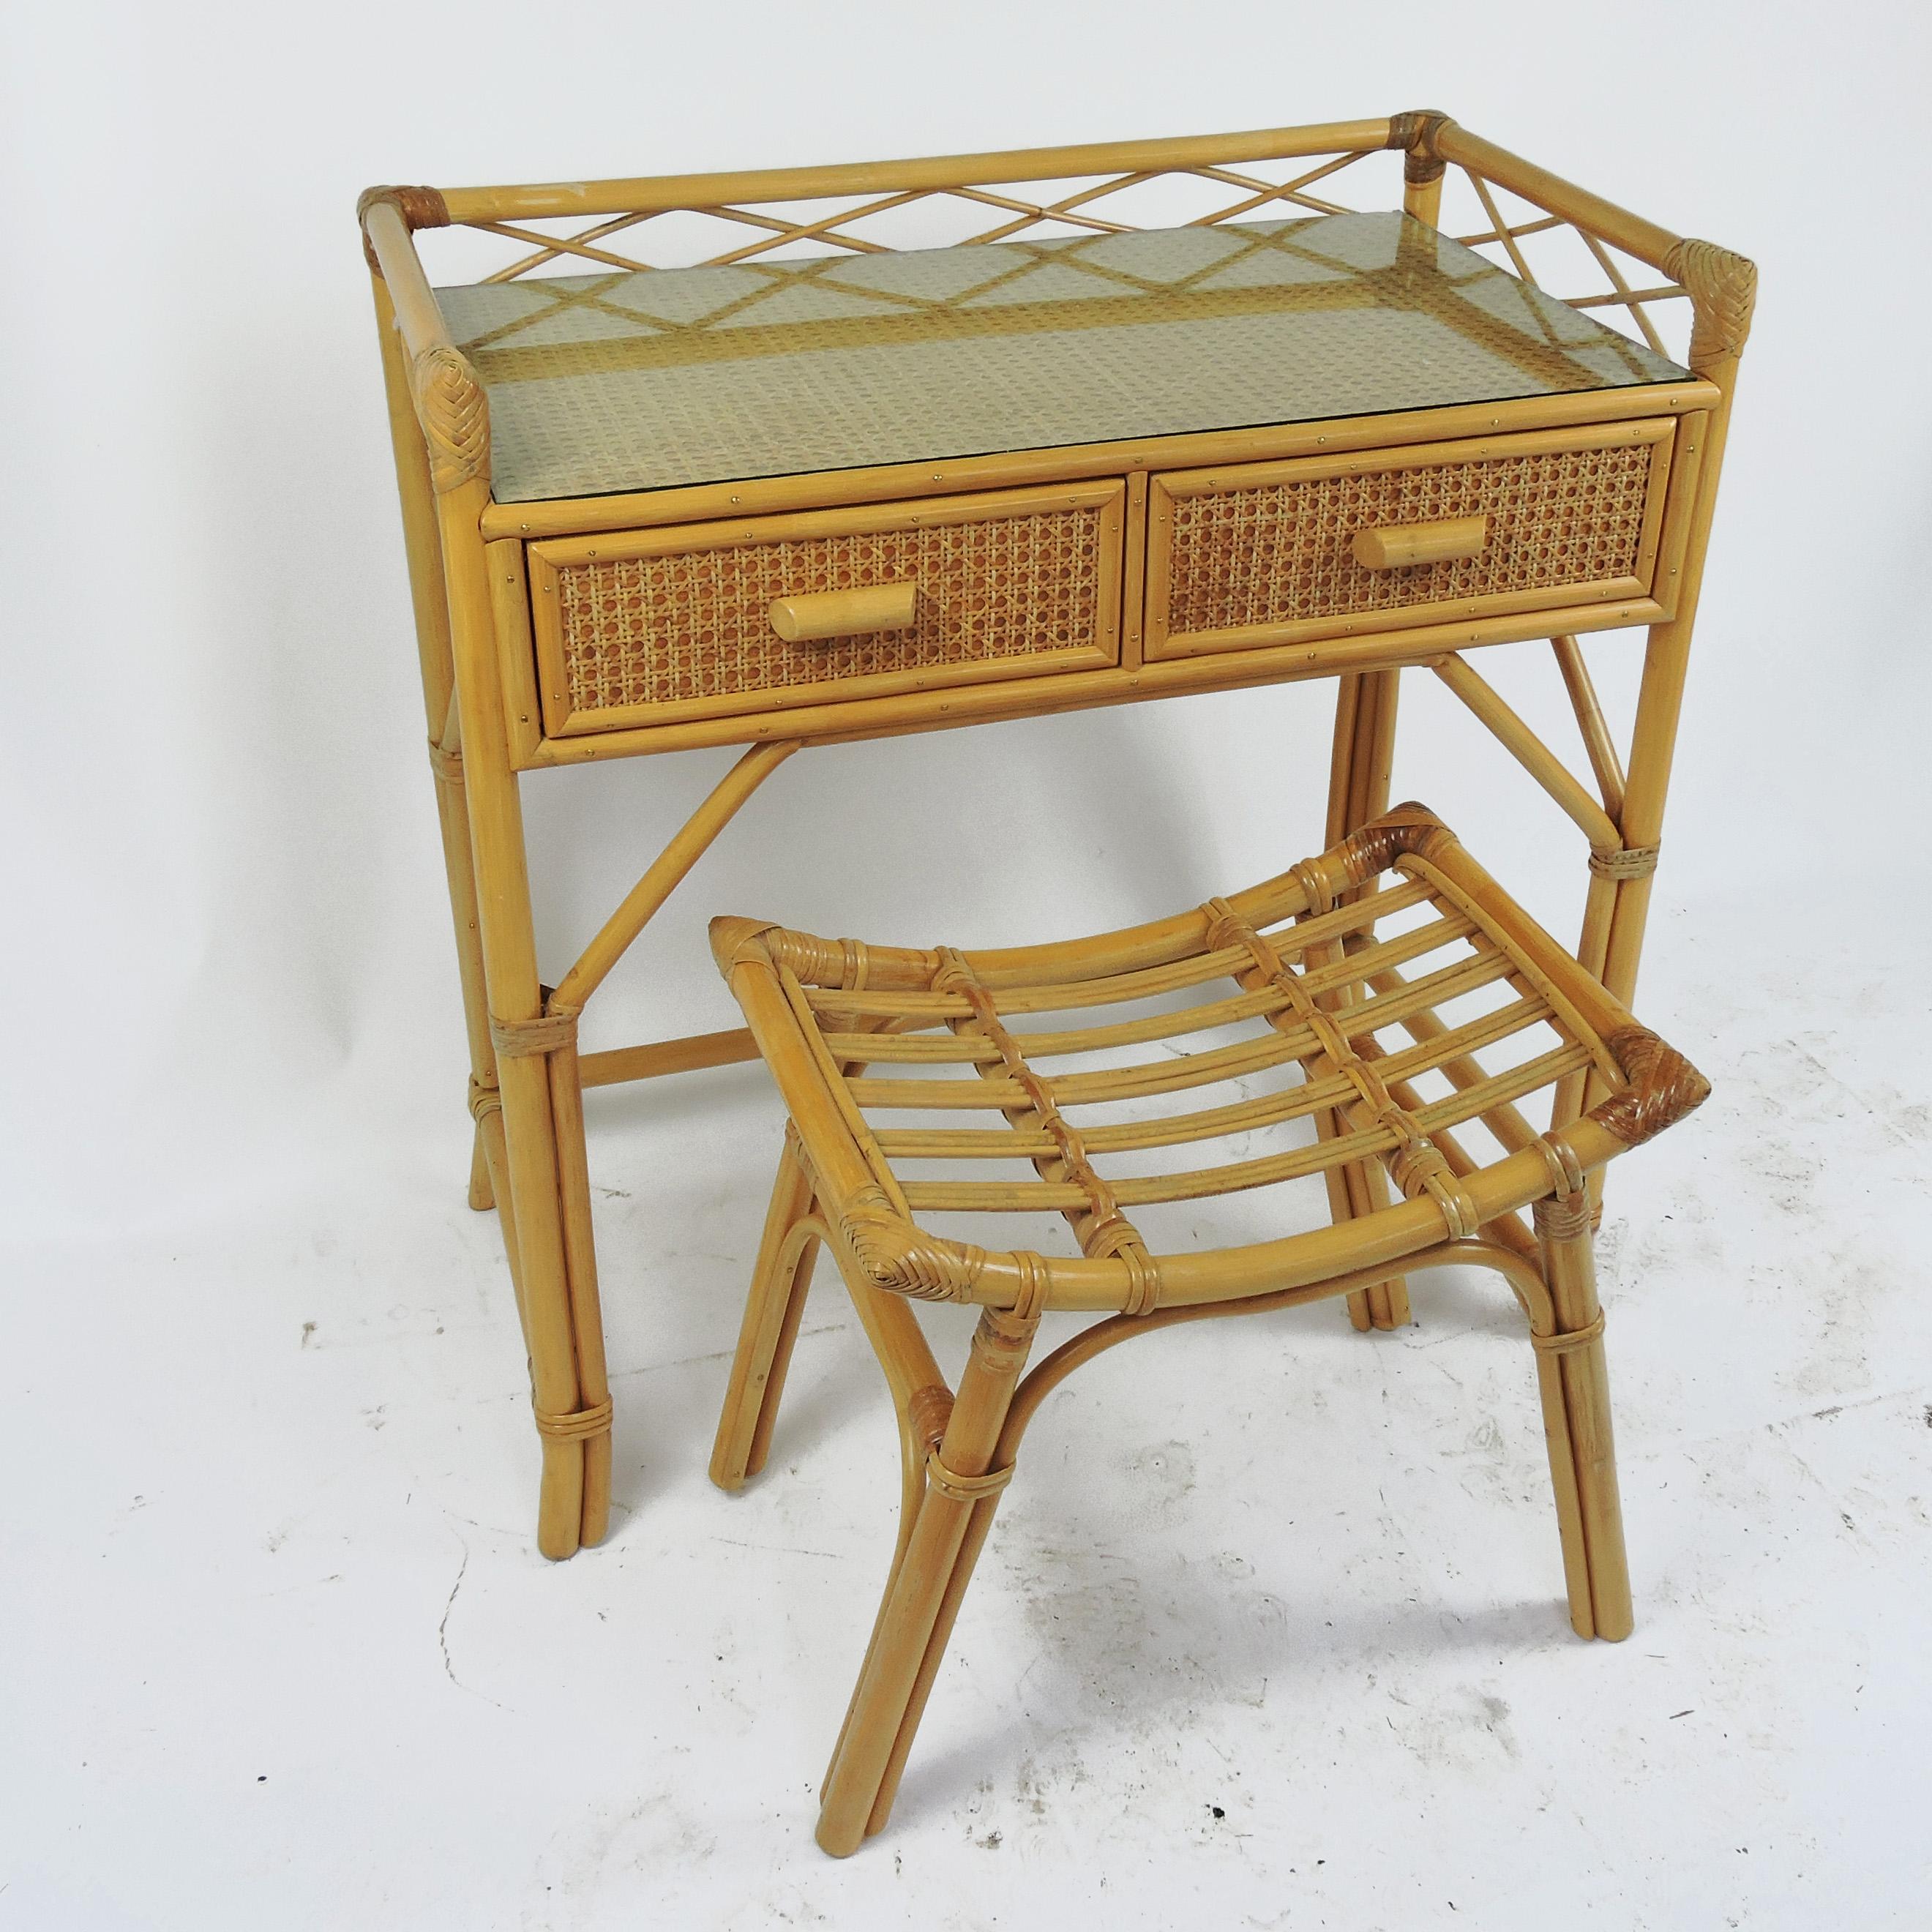 A bamboo and rattan dressing table with matching stool. It can also be used as a desk.